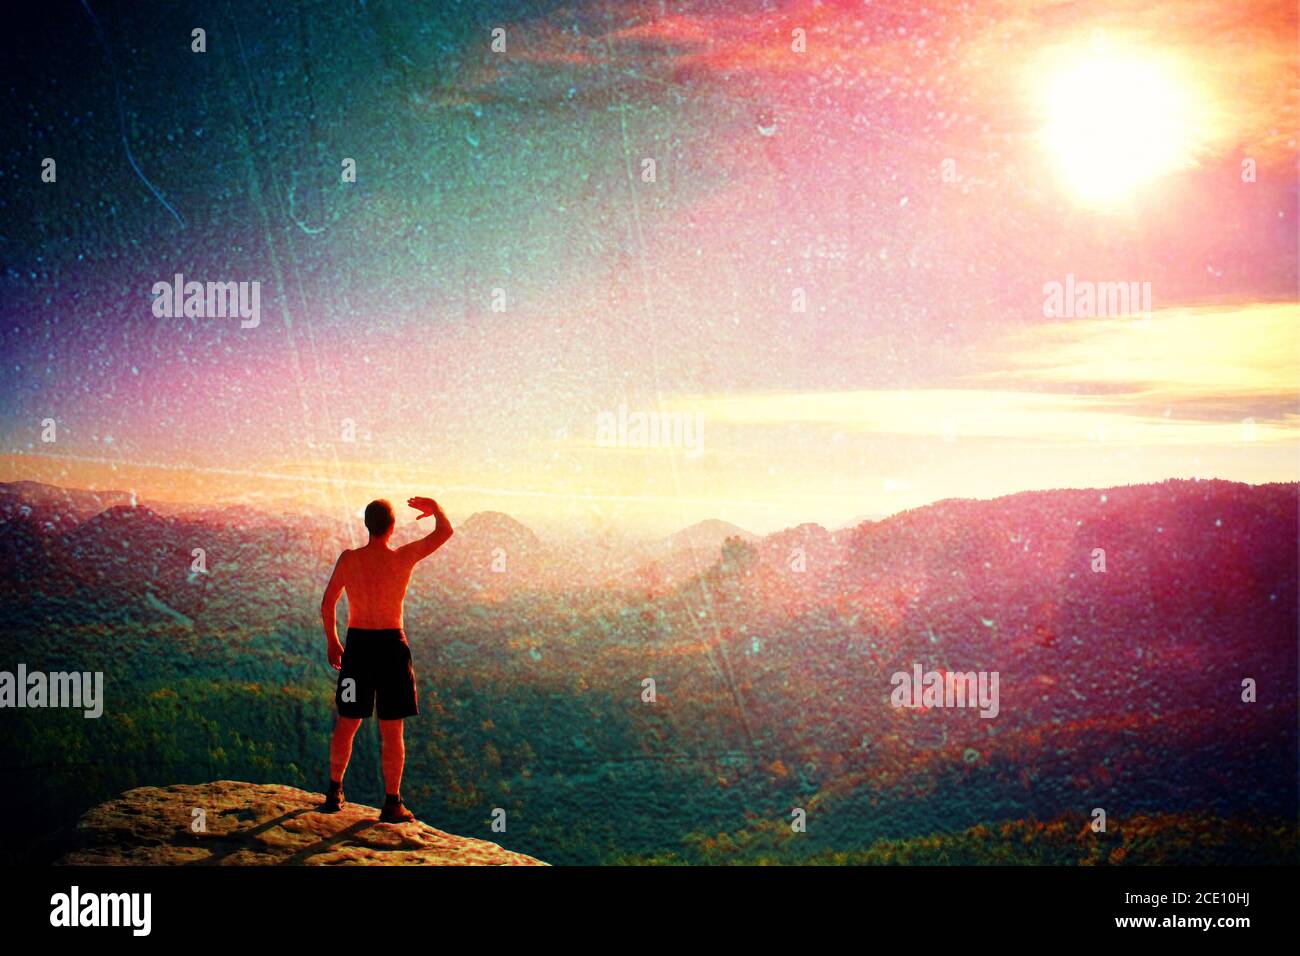 Film grain. Naked man in black pants only at the top of the mountain at Sunset. Dreamy misty valley bellow Stock Photo